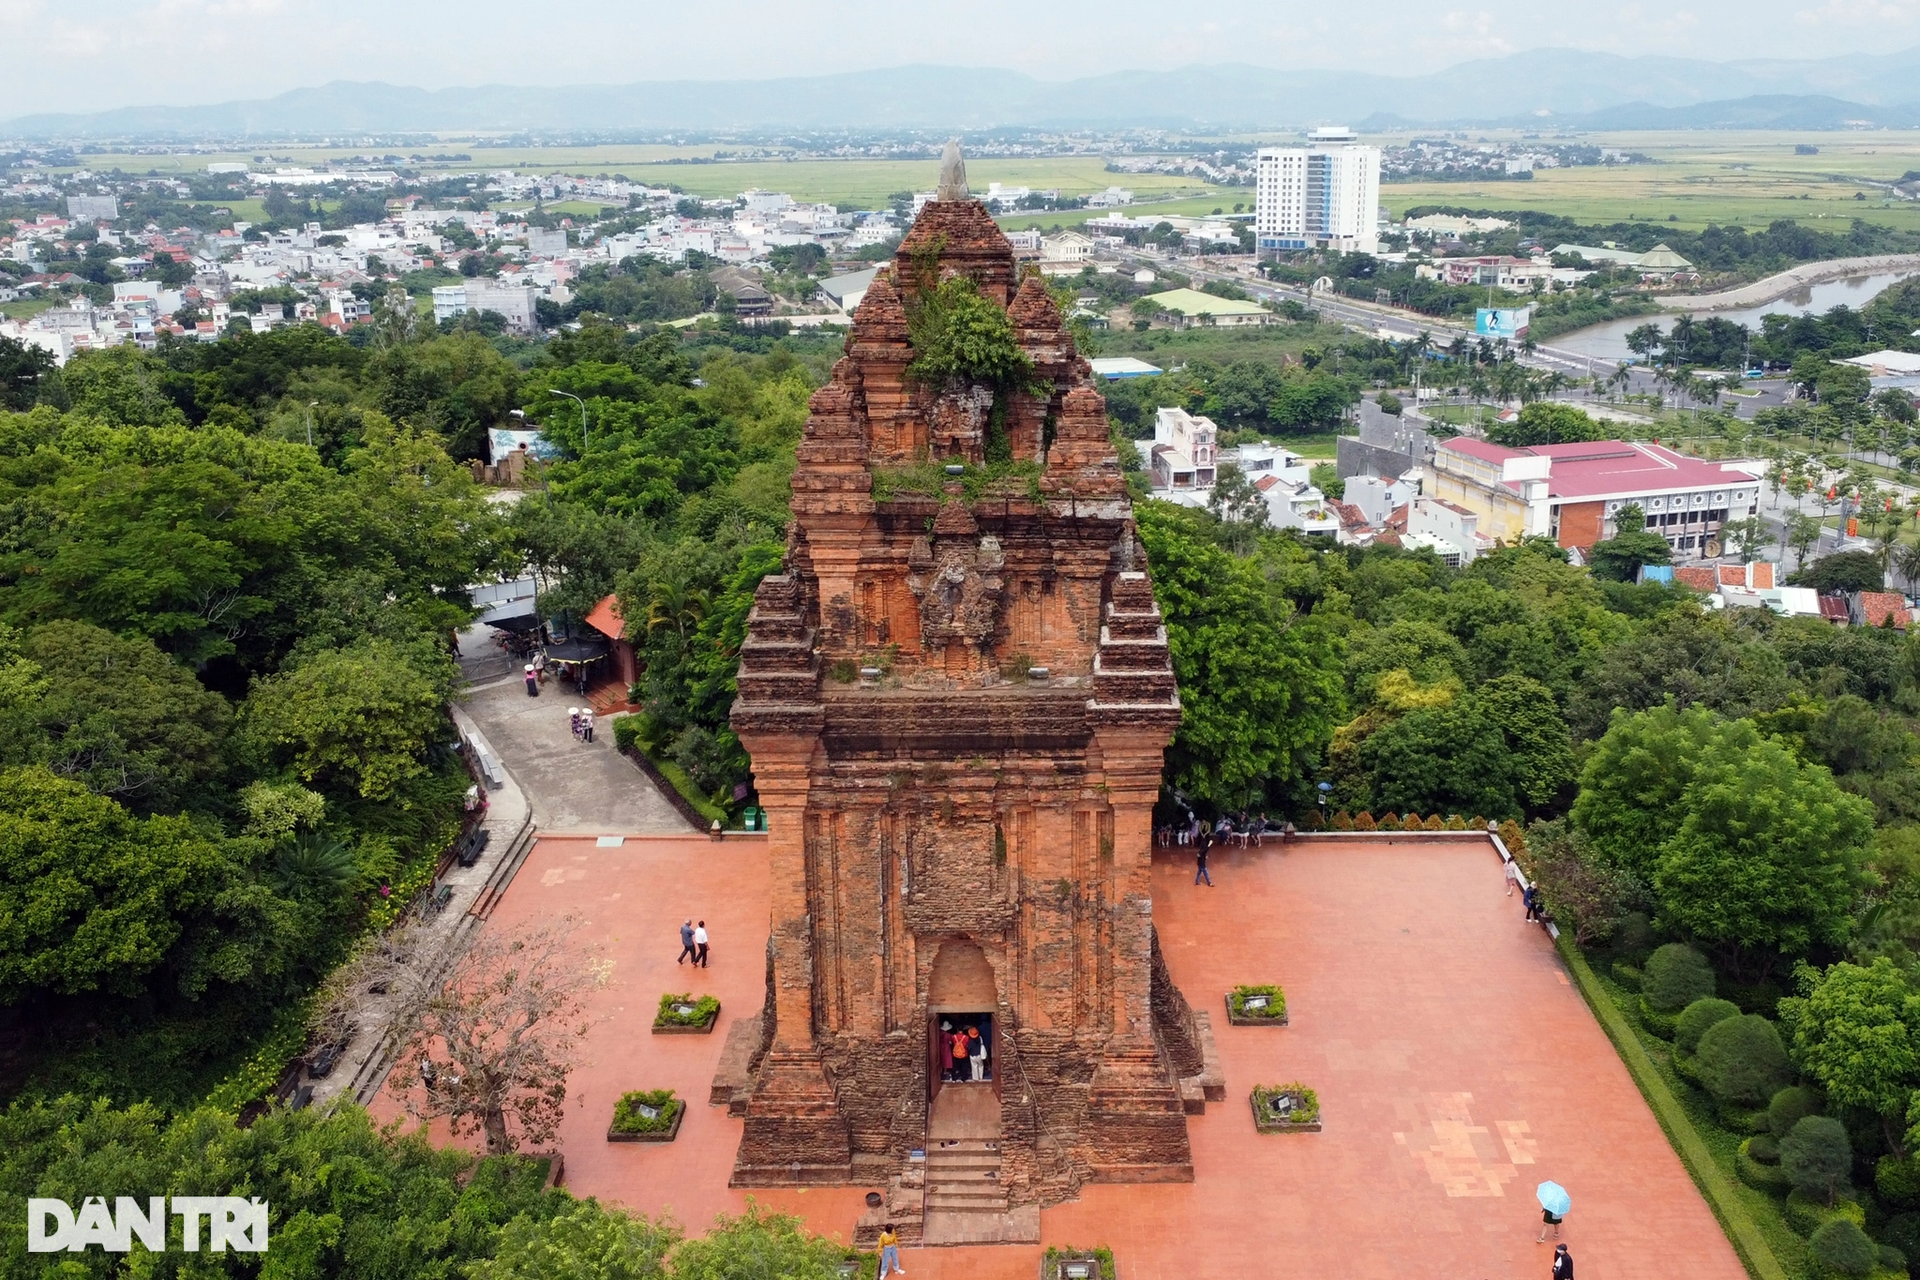 Thousand-year-old Nhan Tower hides many mysteries in Phu Yen - 2